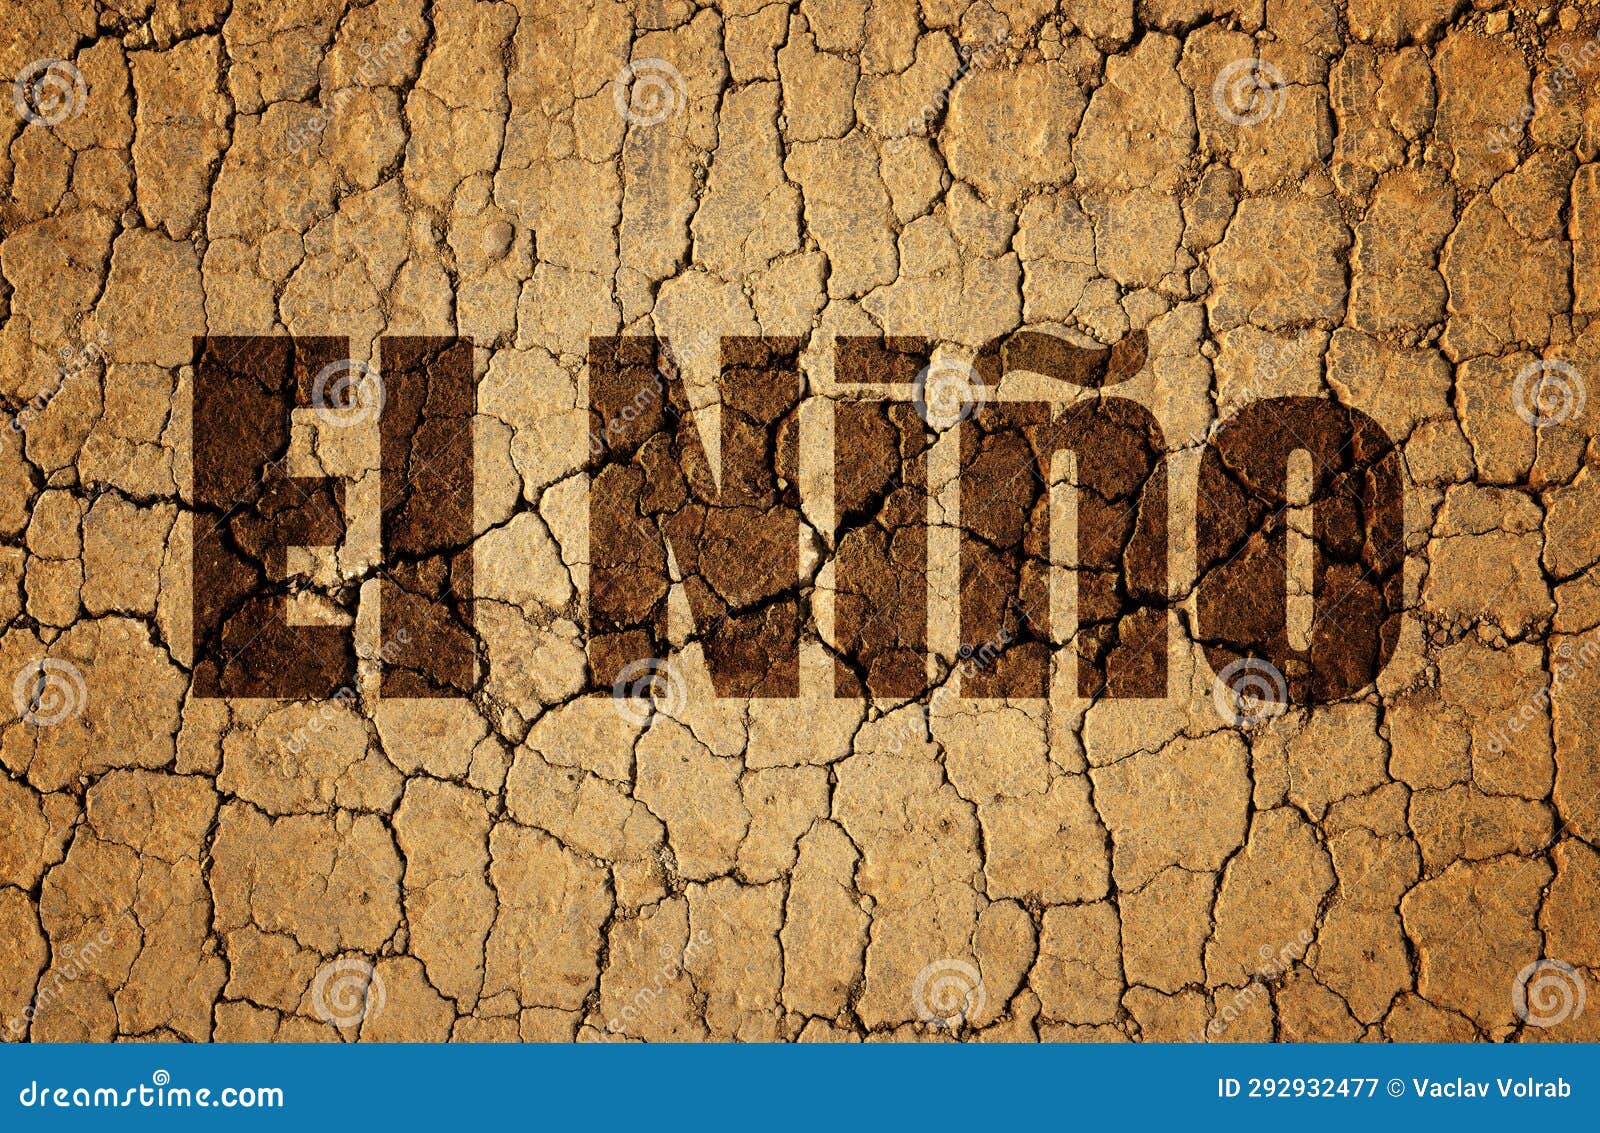 dry cracked soil with el nino text.